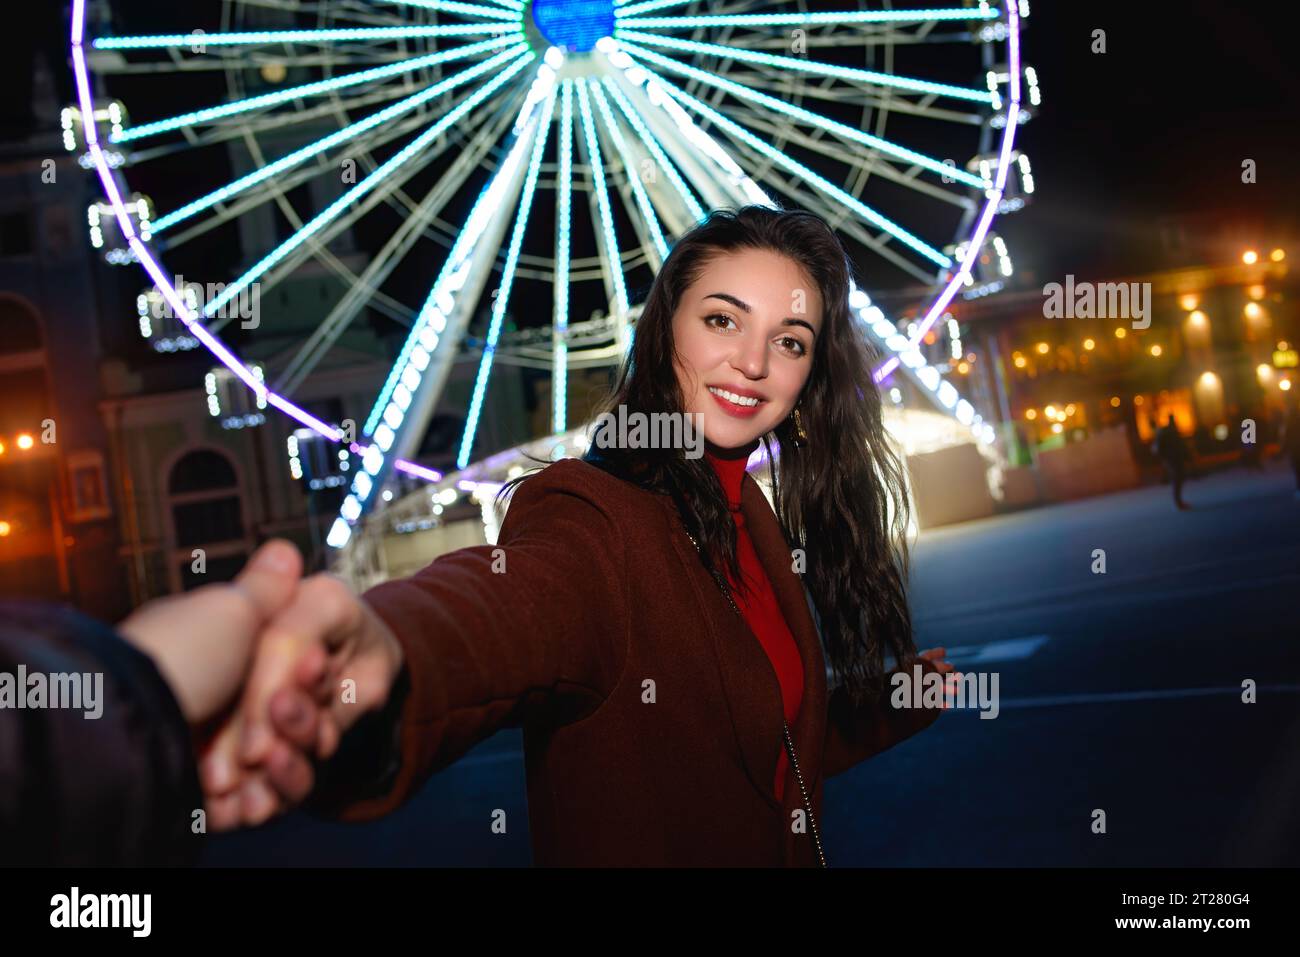 A young beautiful woman in a red coat takes her boyfriend's hand while walking in front of a Ferris wheel at an amusement park. Stock Photo